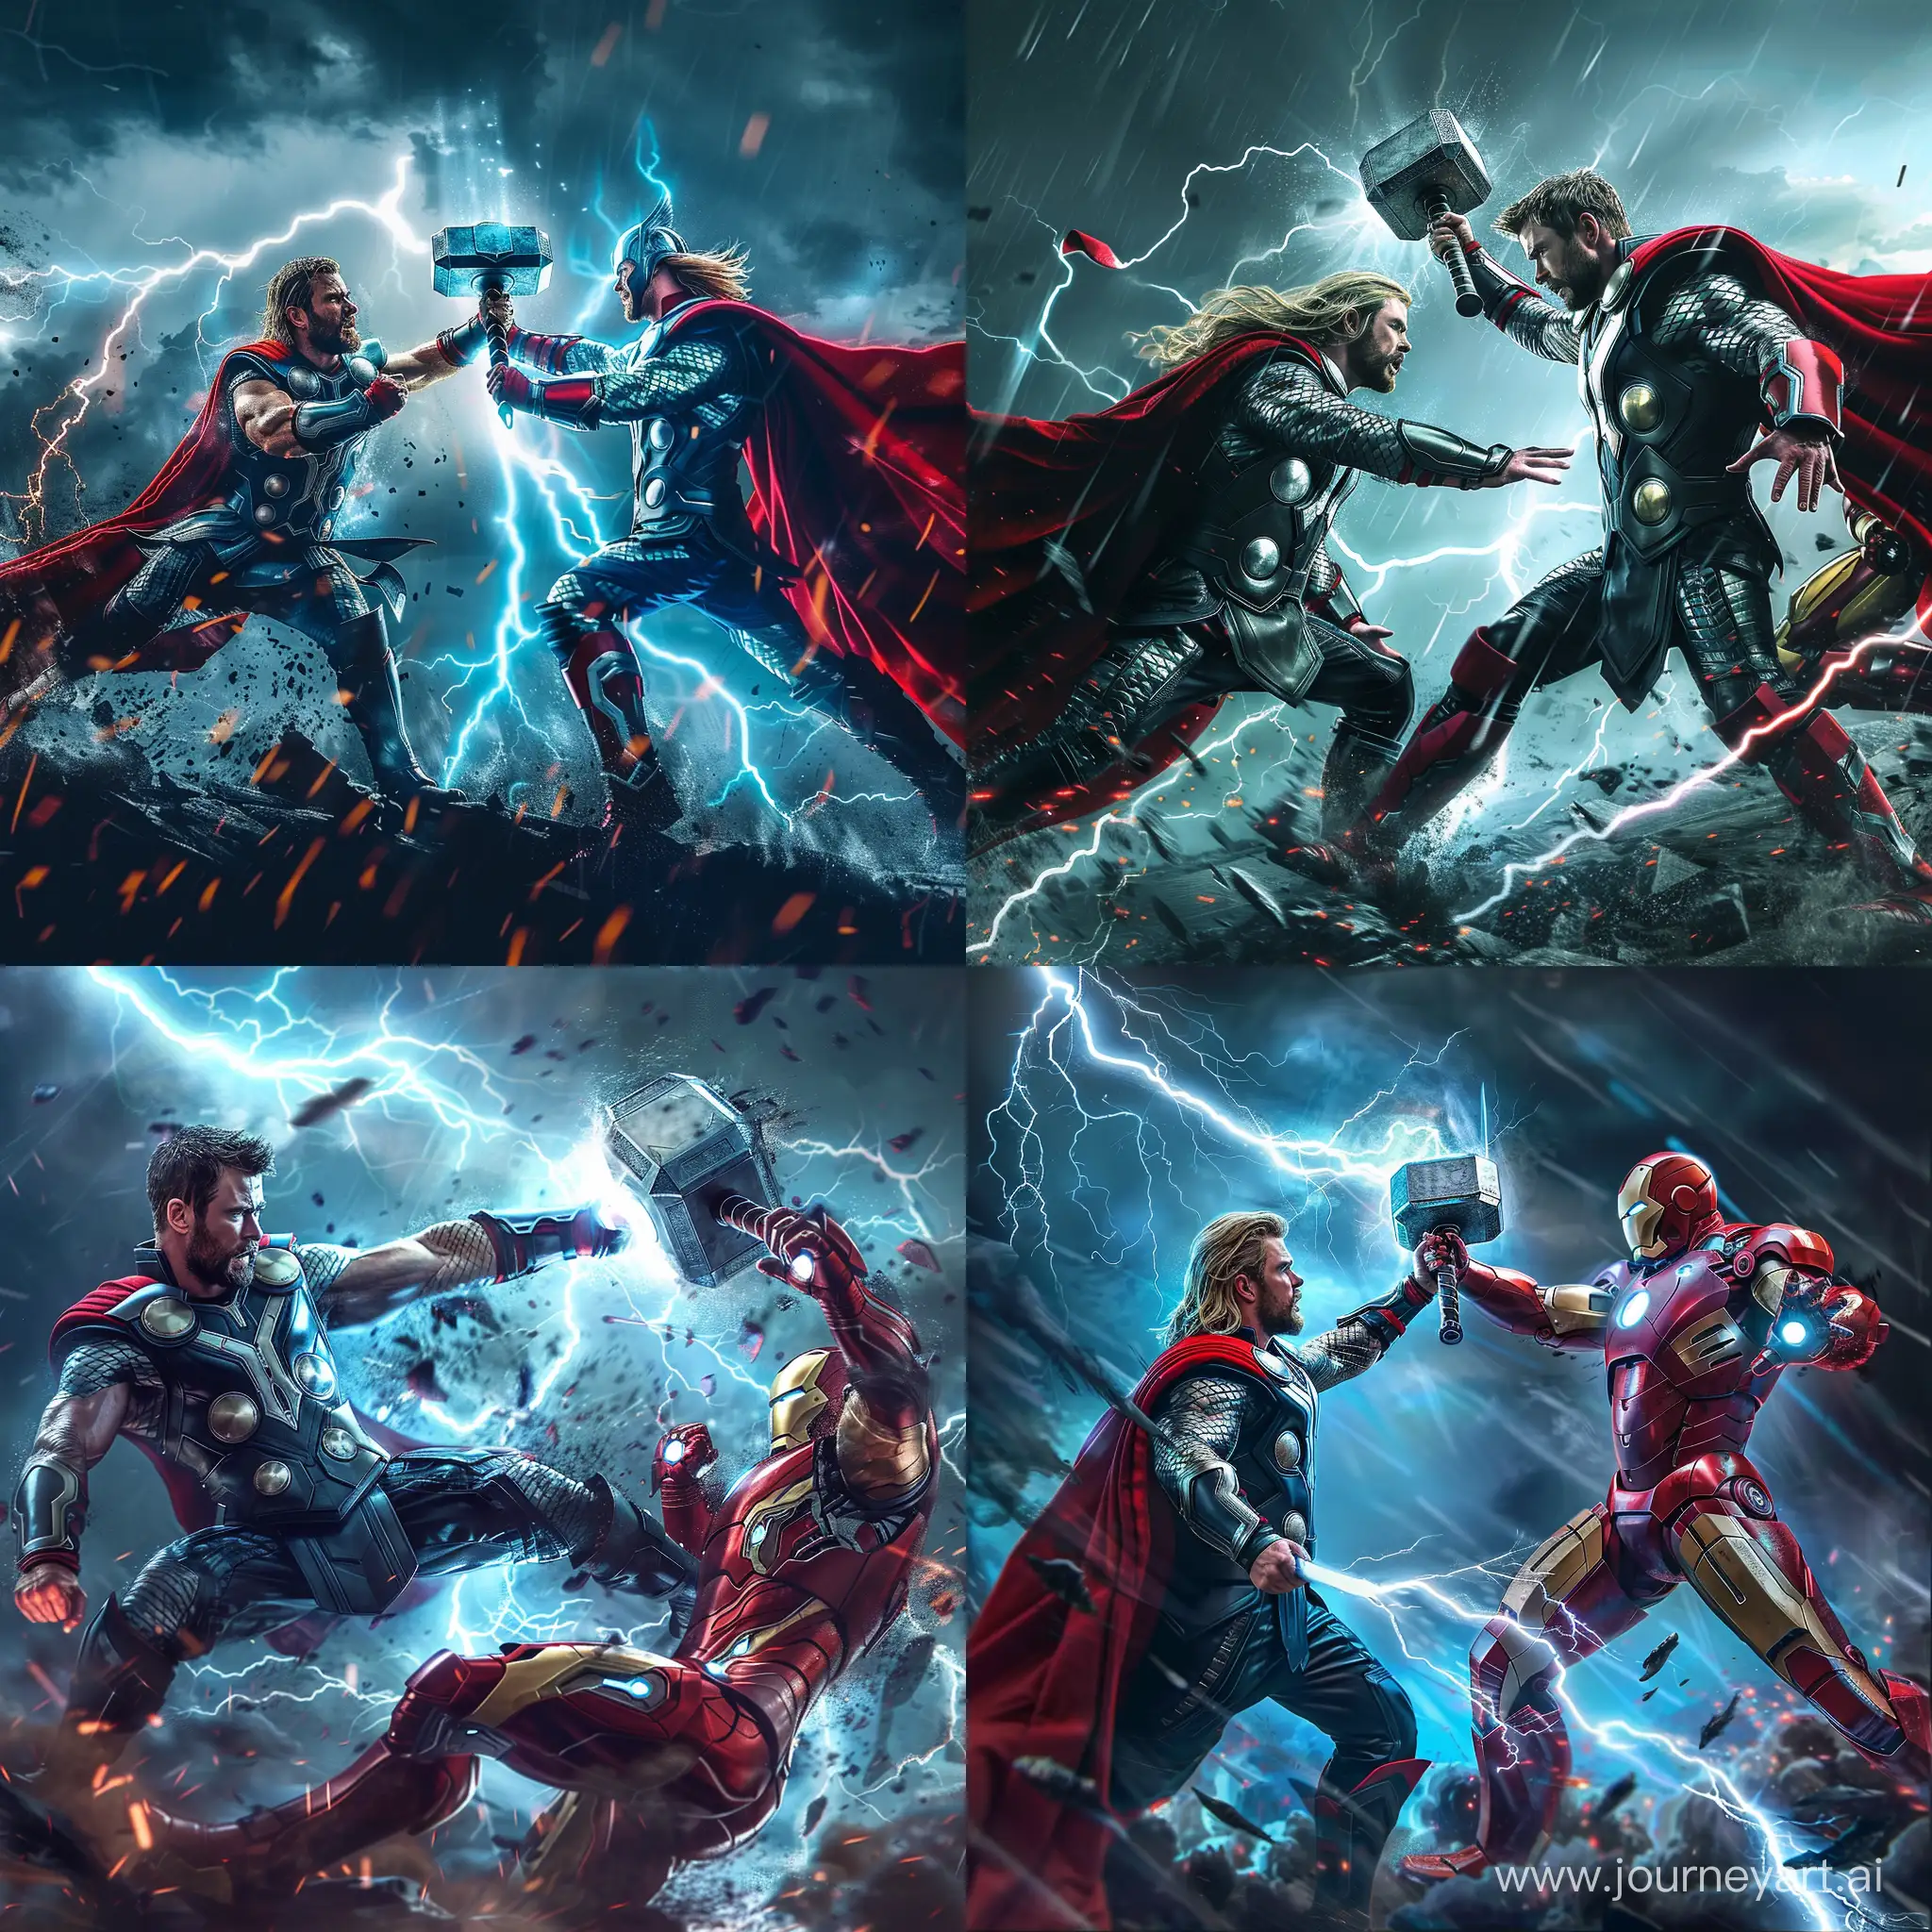 Epic-Battle-Thor-vs-Iron-Man-in-Cinematic-Thunderstorm